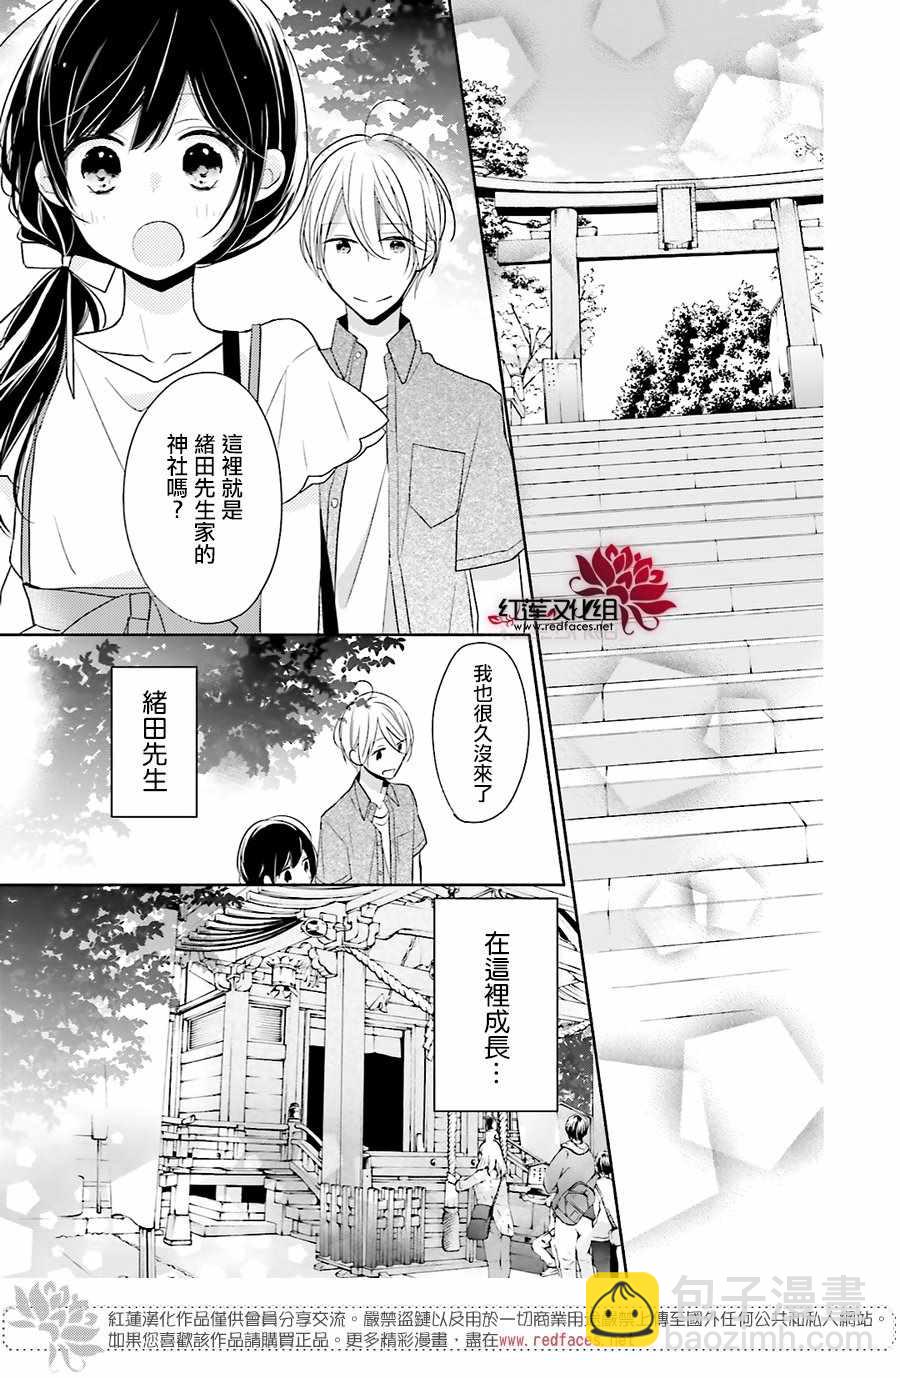 If given a second chance - 11话 - 3